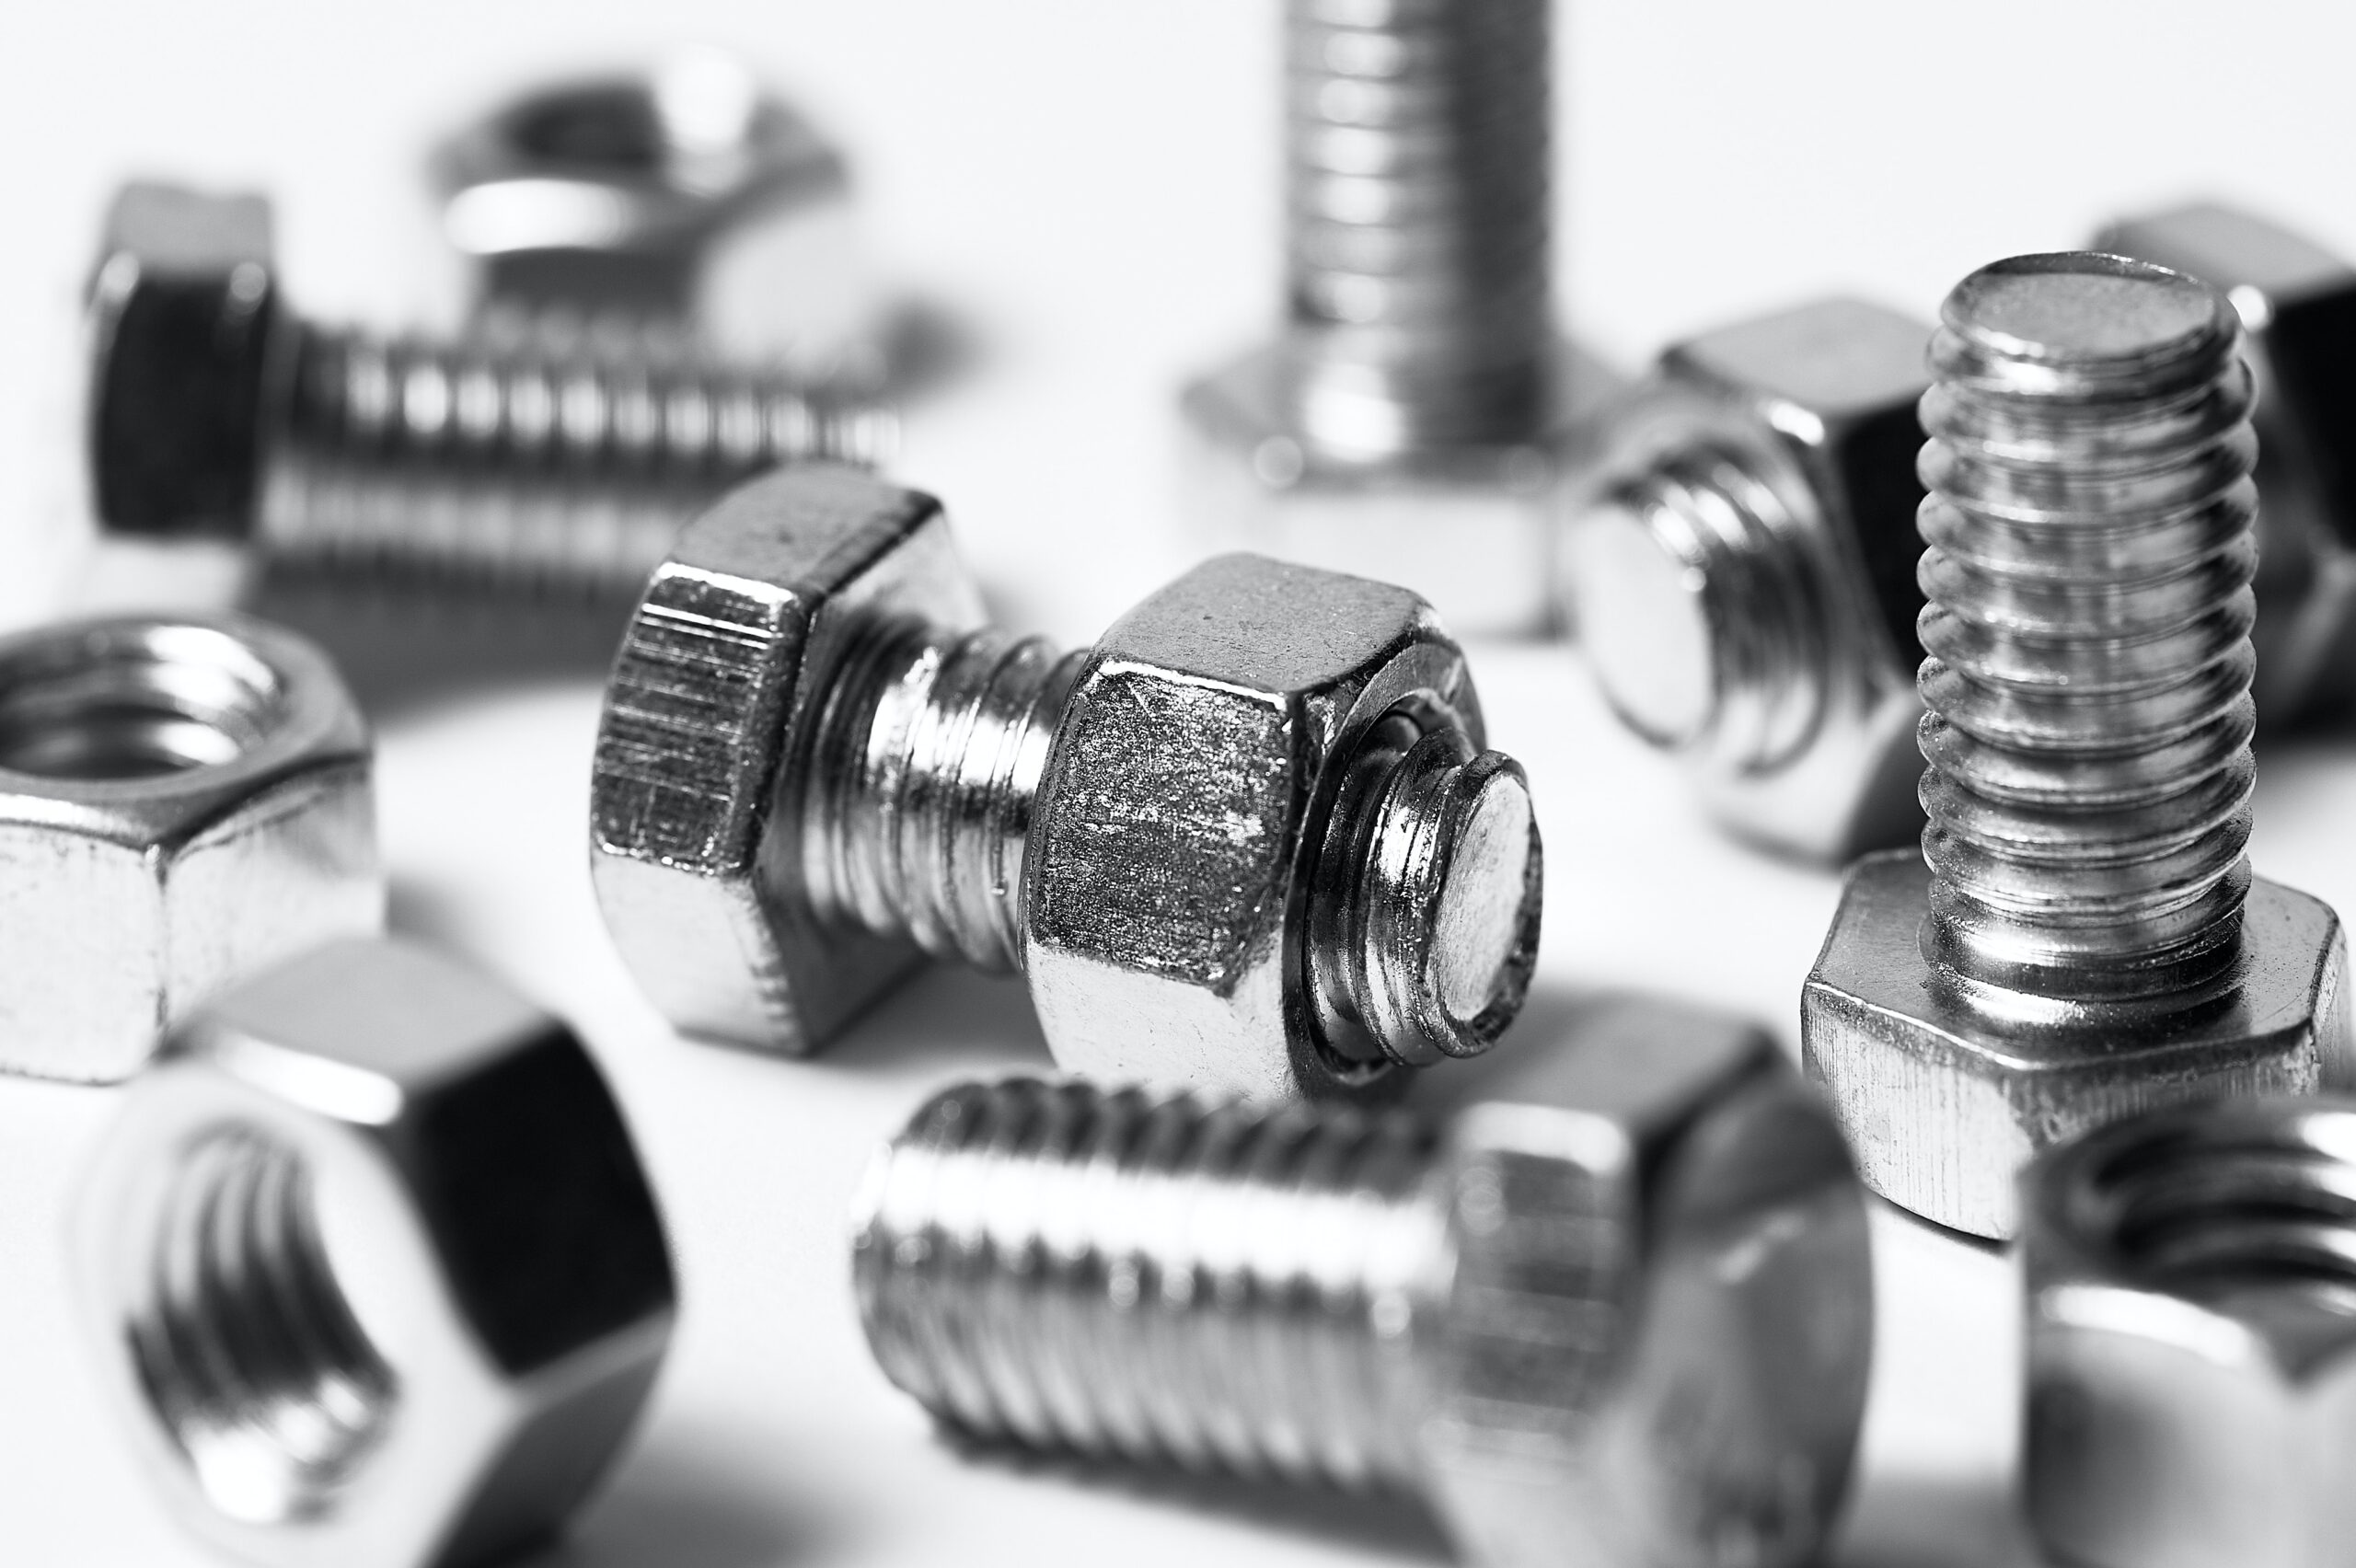 US Screws – What Are US Screws Sizes and Lengths?